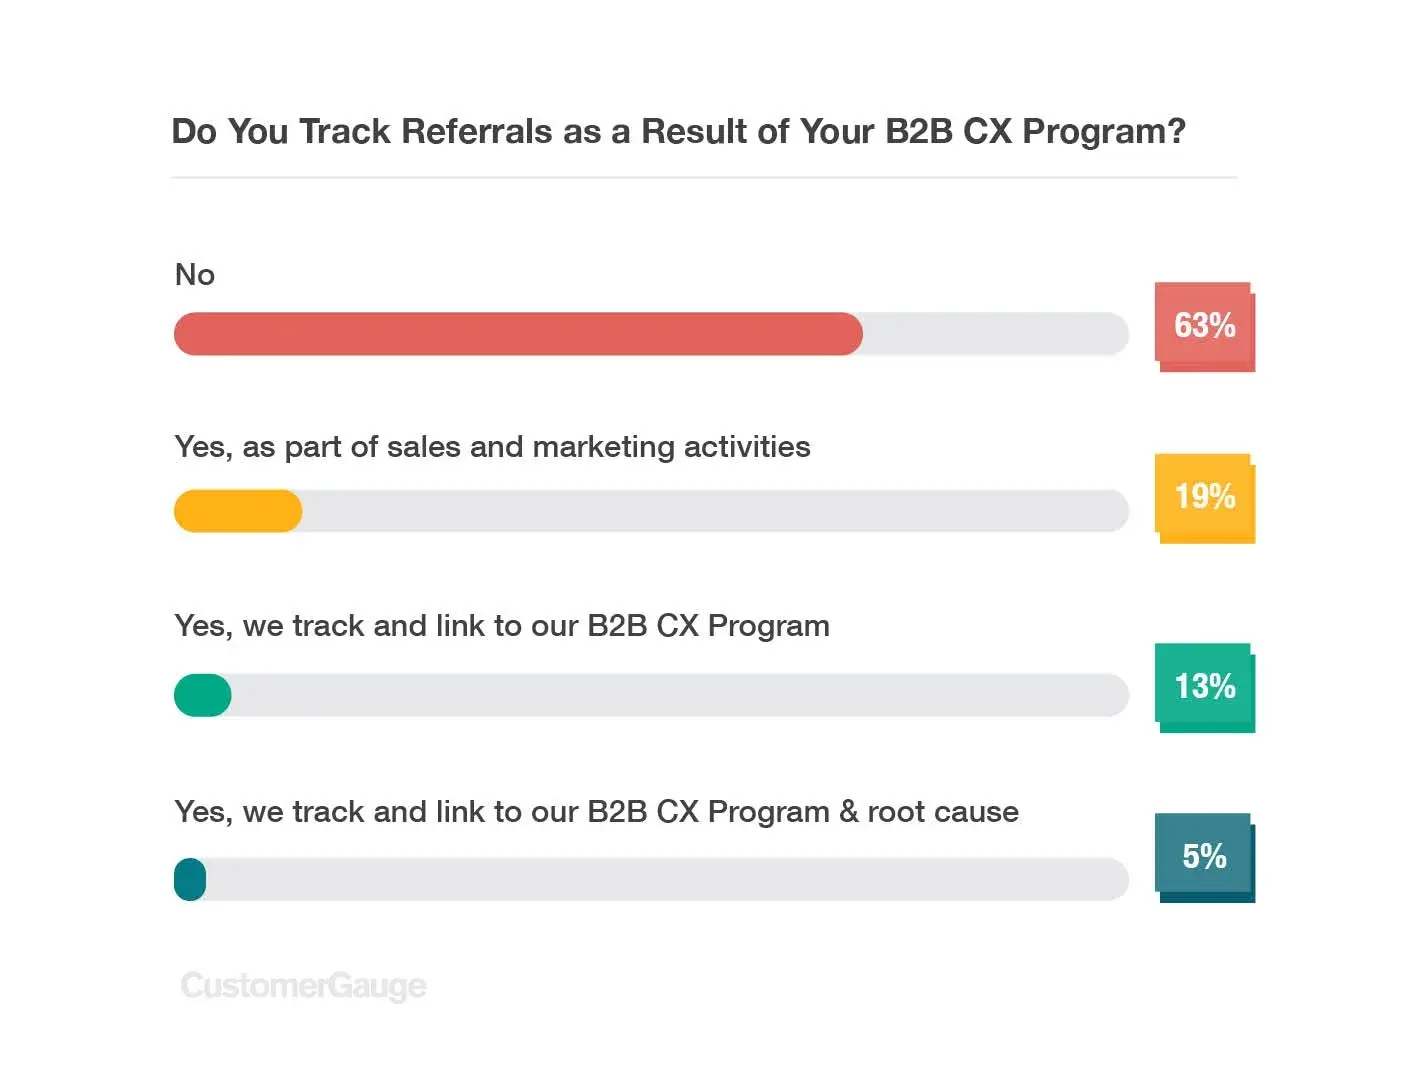 Do You Track Referrals as a Result of Your B2B CX Program Chart